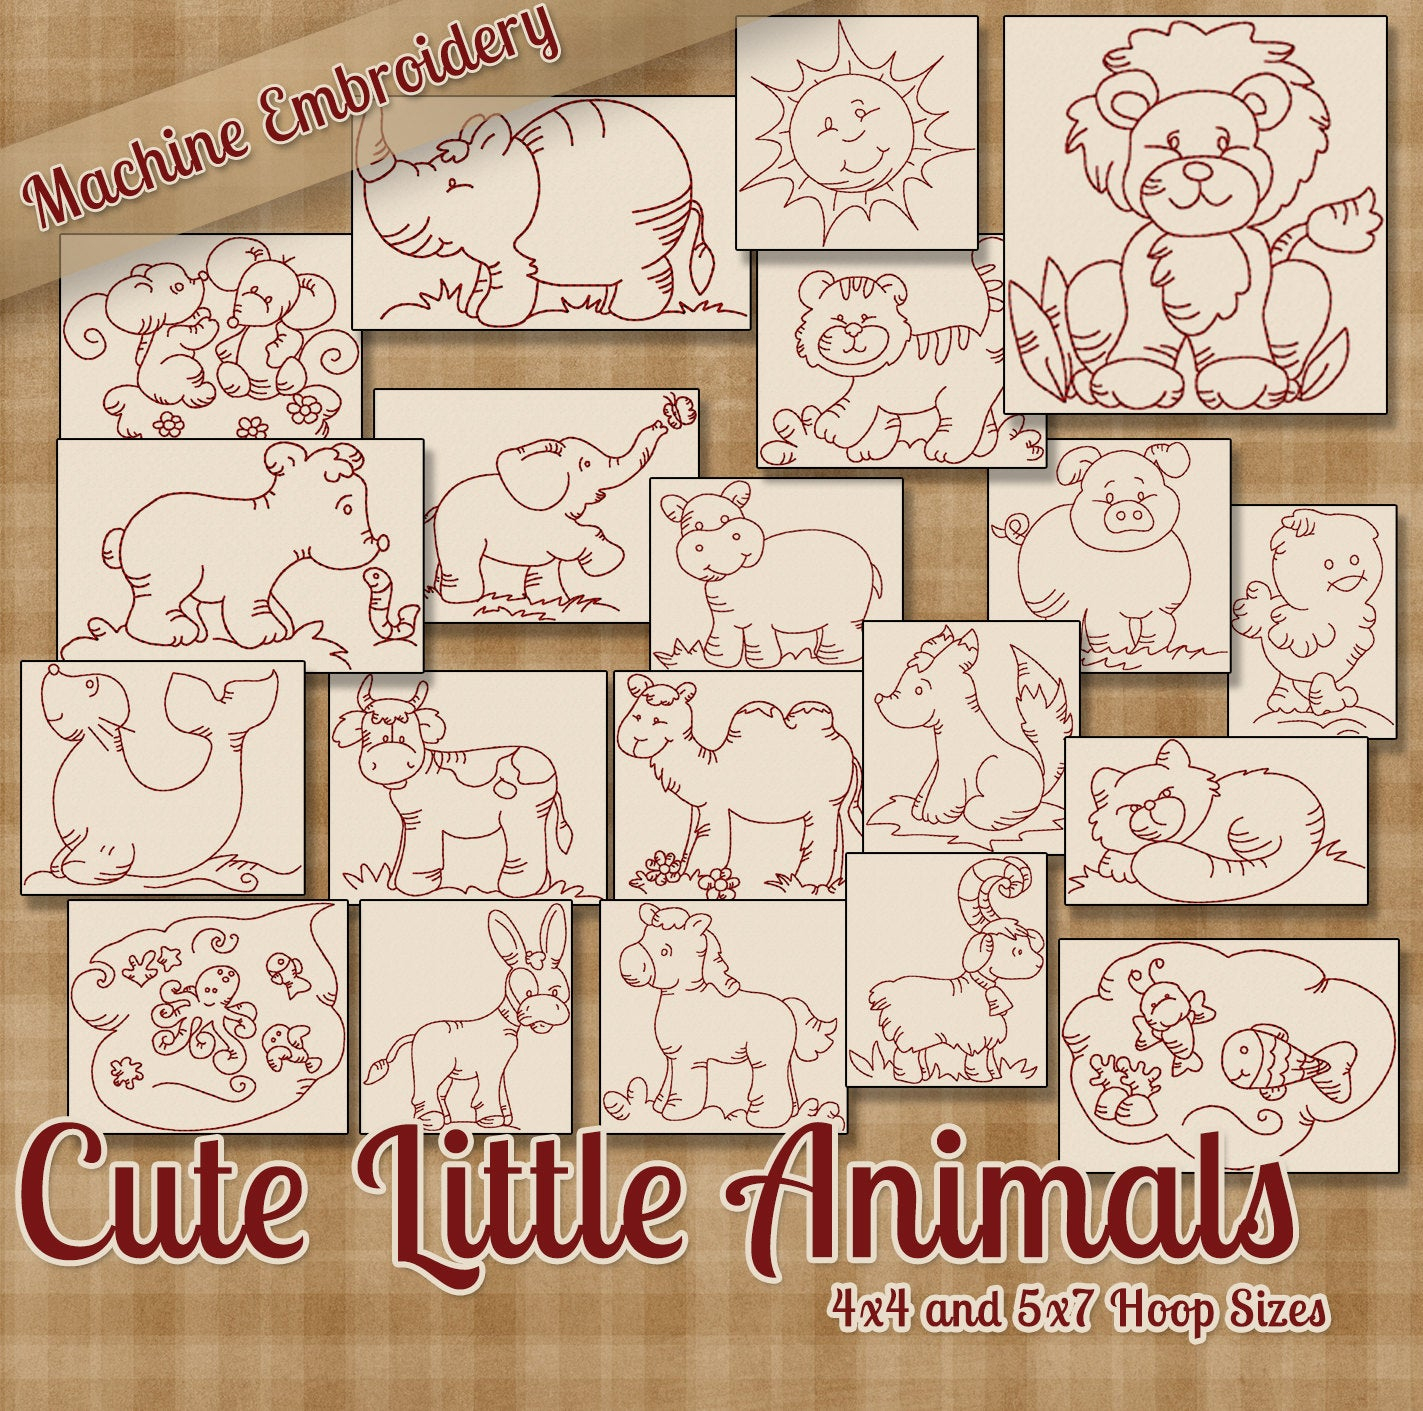 Free Machine Embroidery Patterns To Download Cute Little Animals Machine Embroidery Patterns Redwork Designs 20 Designs Instant Download Dst Hus Jef Pes Sew Vip Xxx